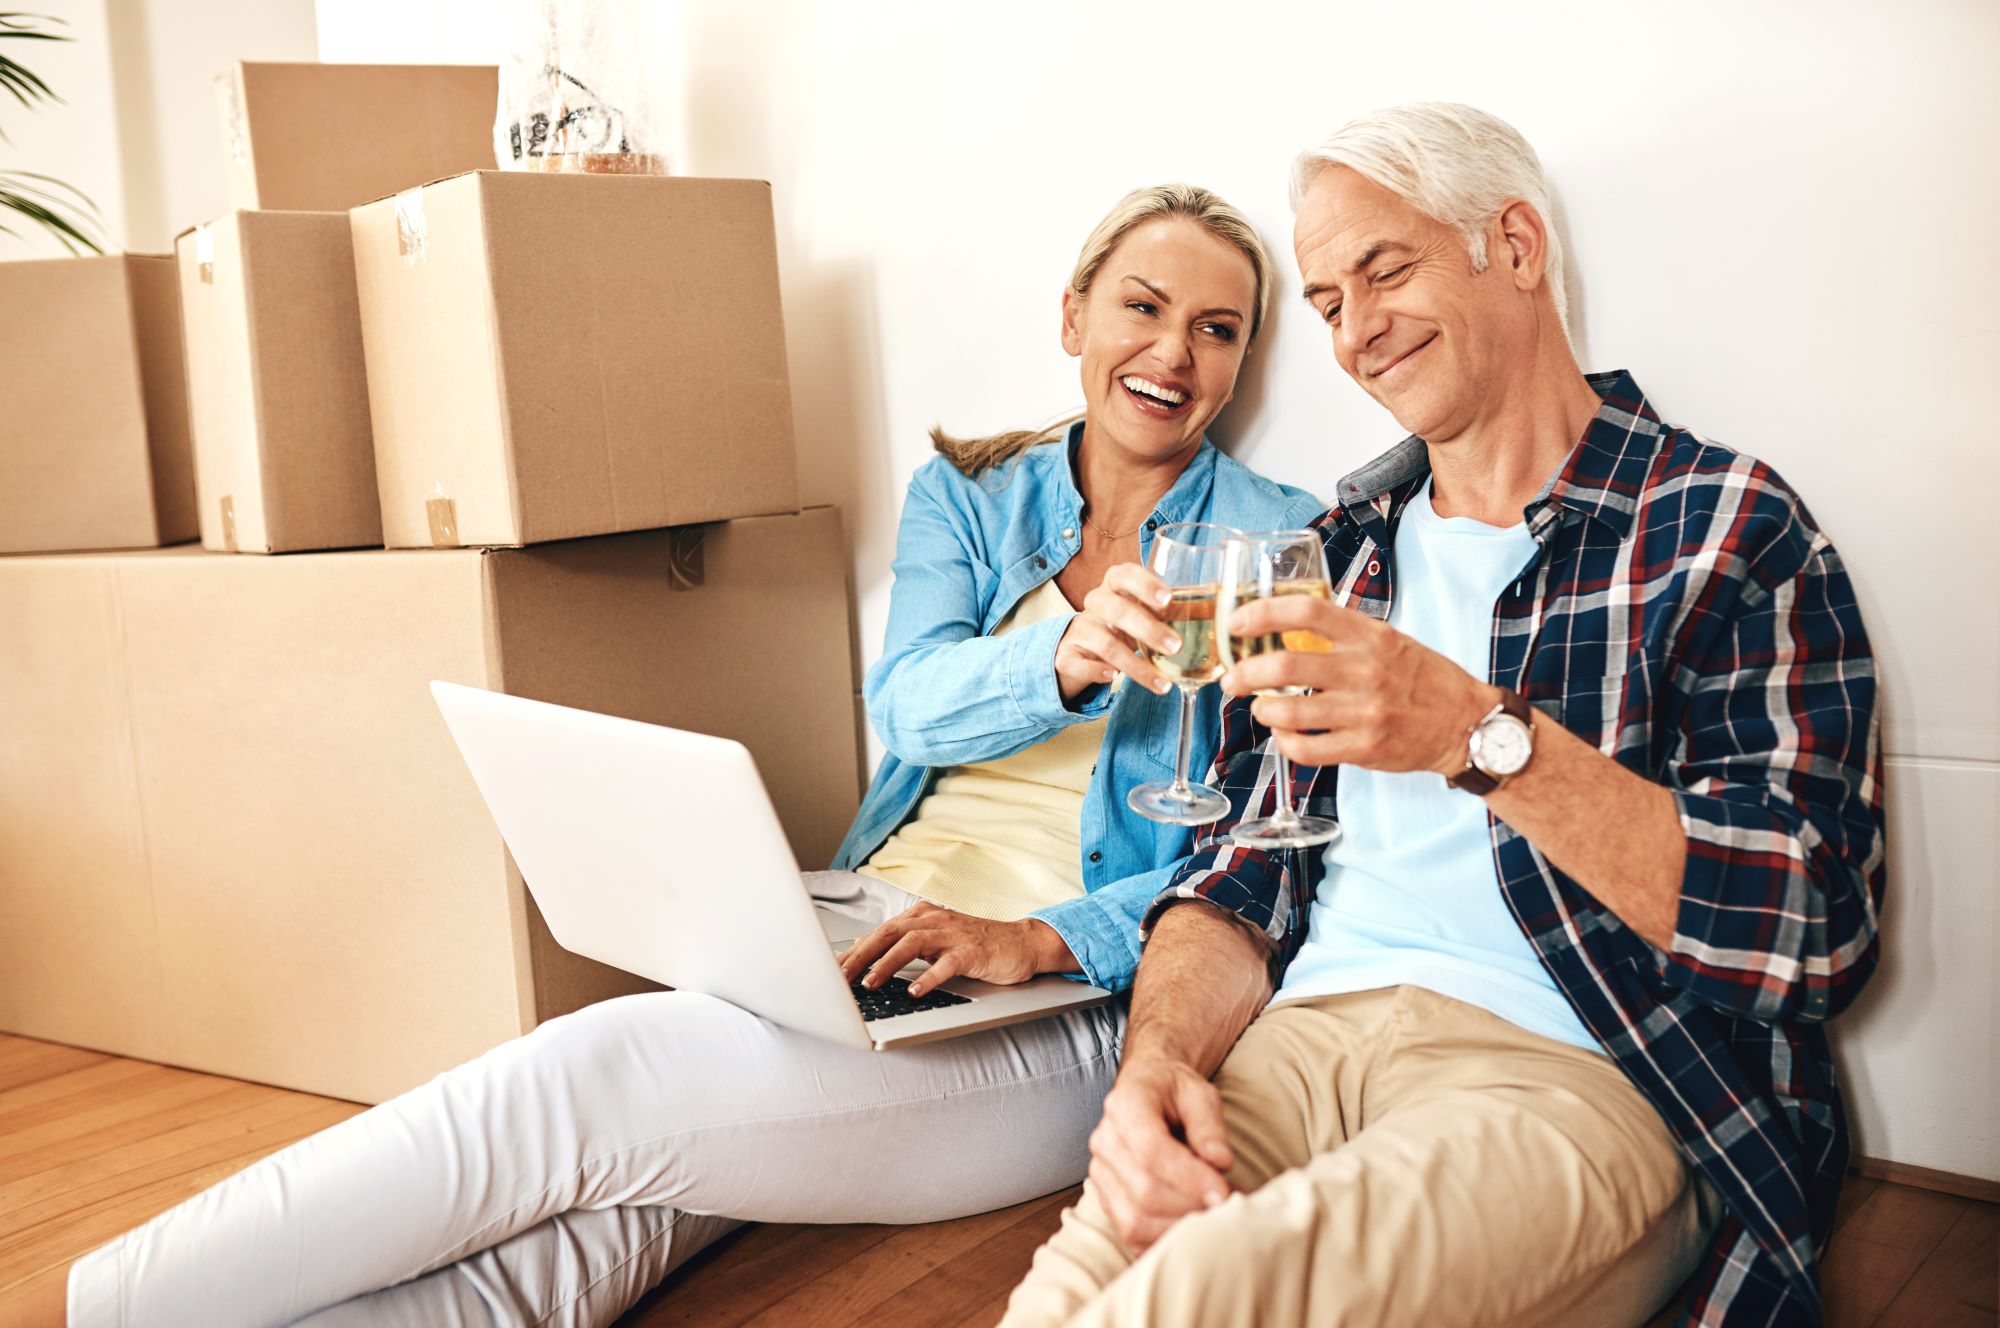 6 Tips for a Stress-Free Relocation After Retirement